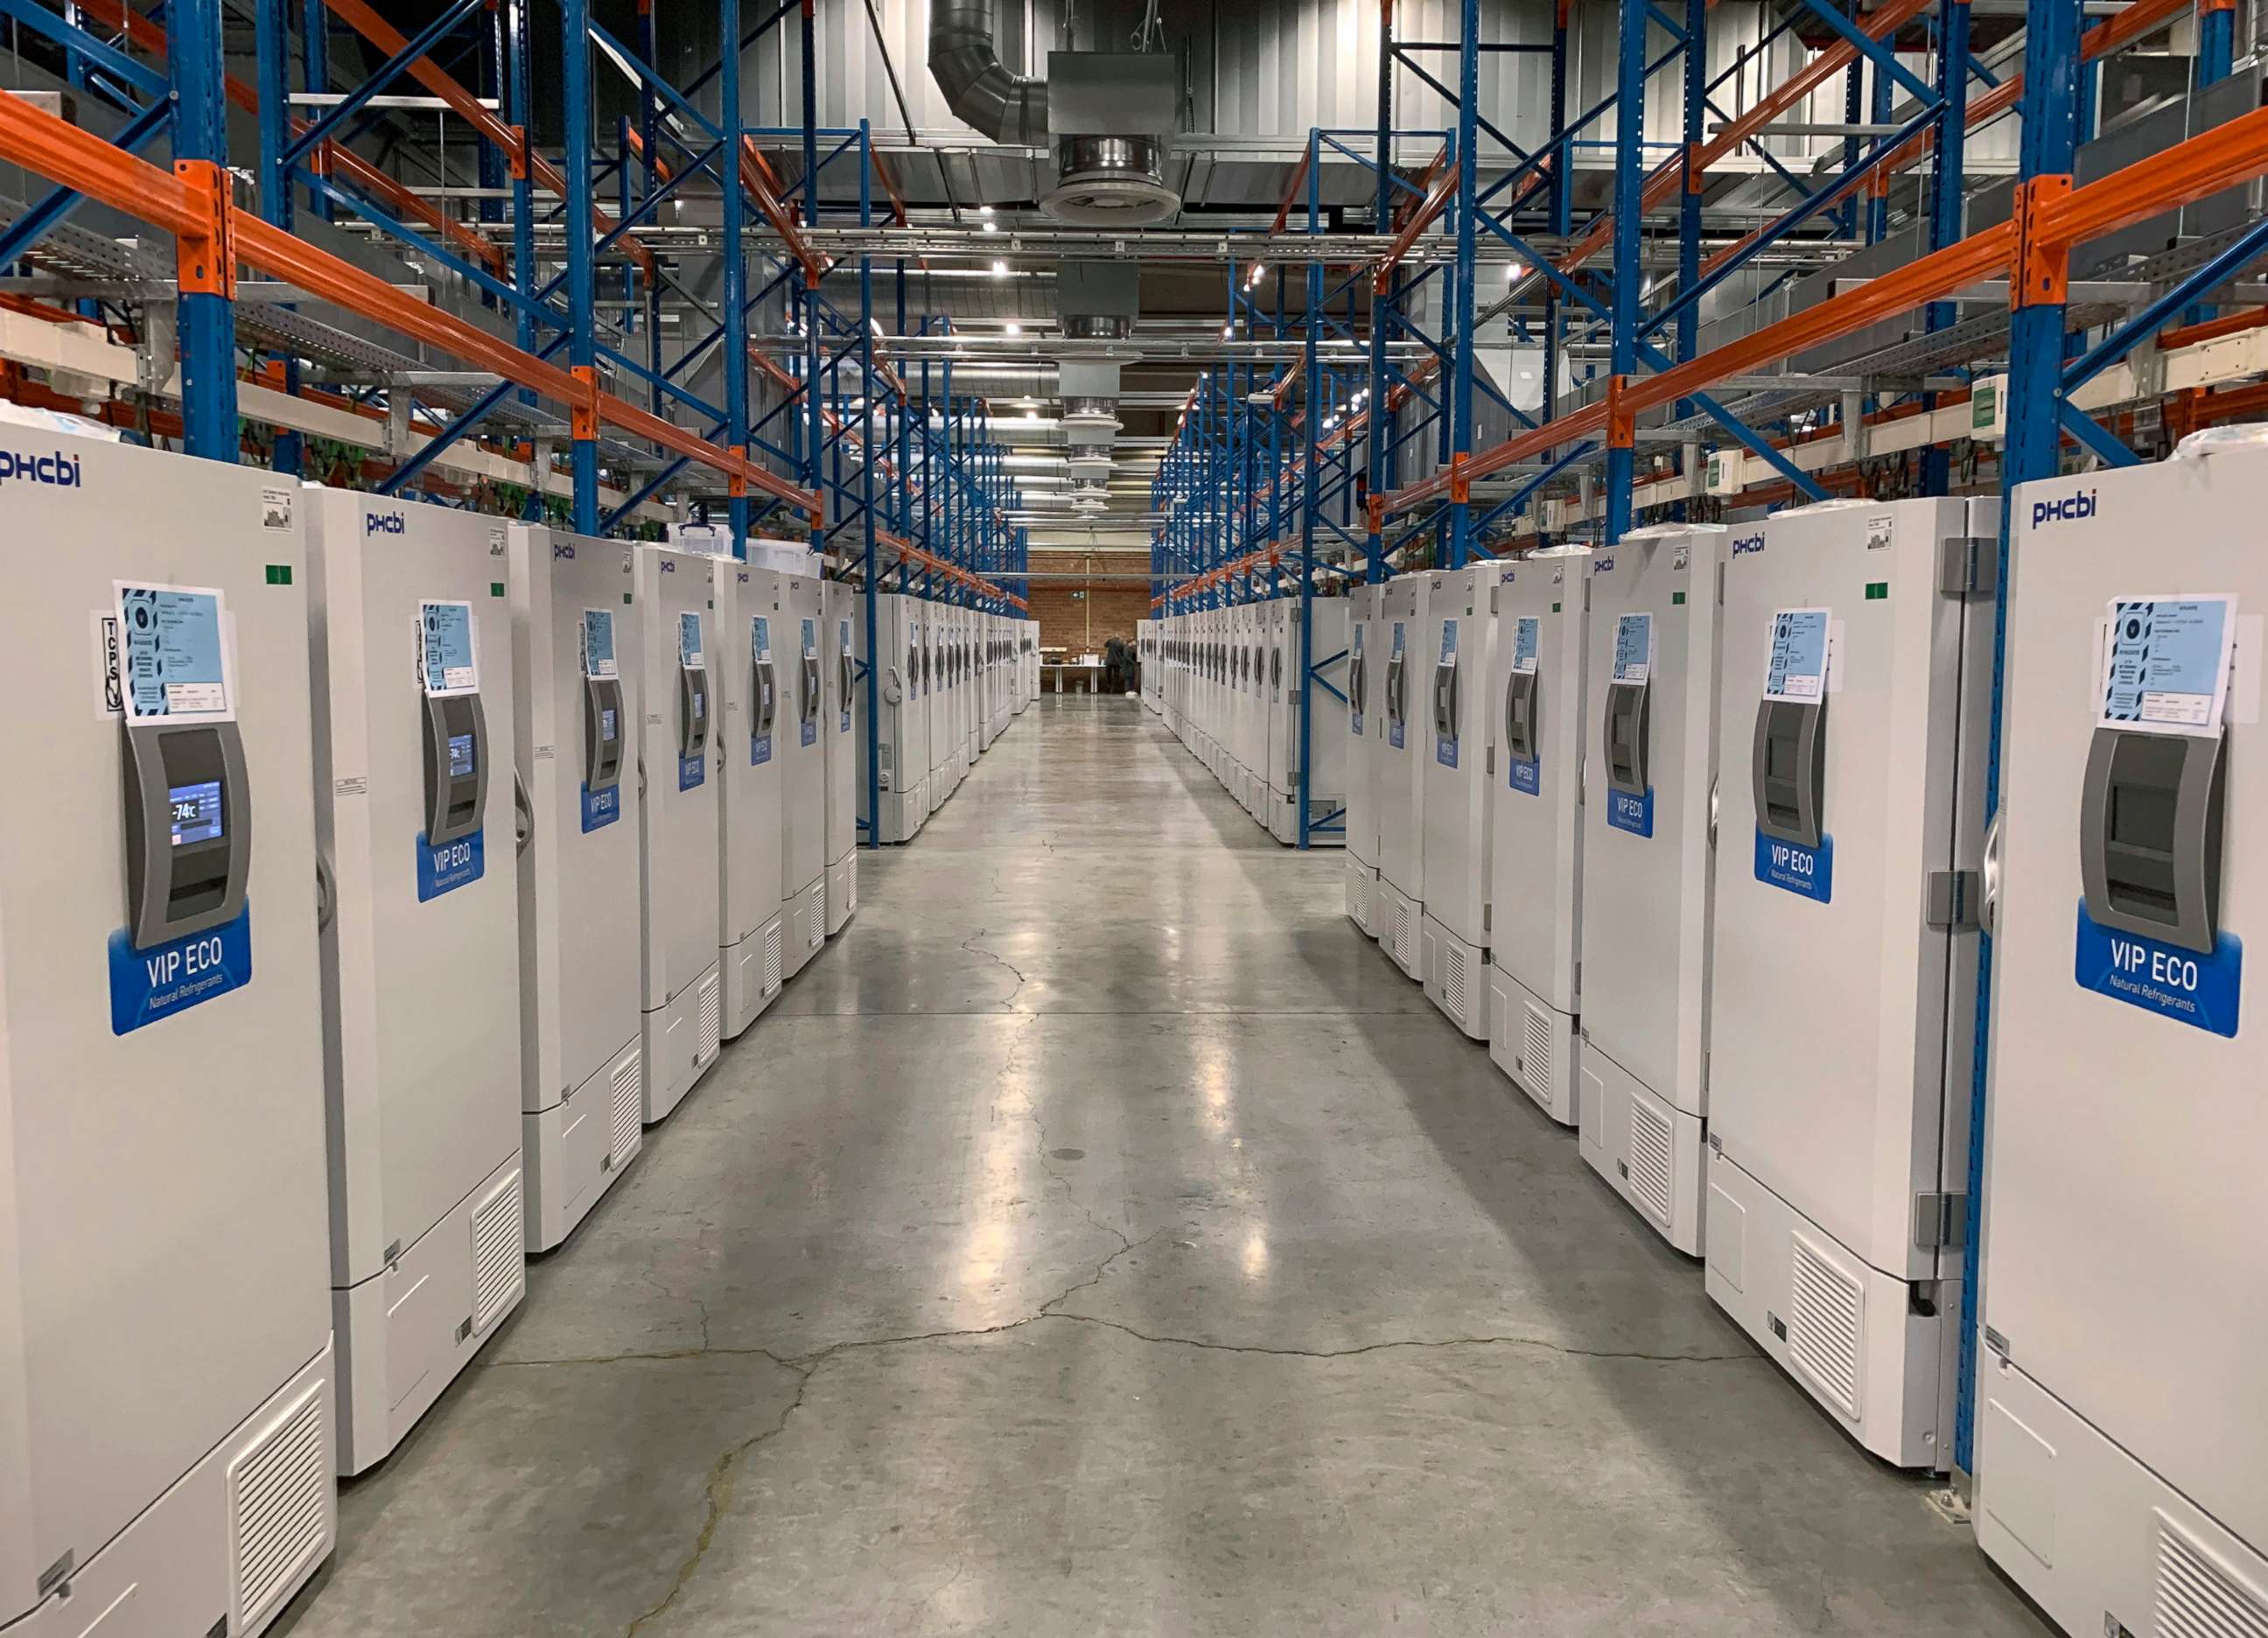 PHOTO: A "freezer farm," a football field-sized facility for storing COVID-19 vaccines, in Puurs, Belgium, in Oct. 2020.